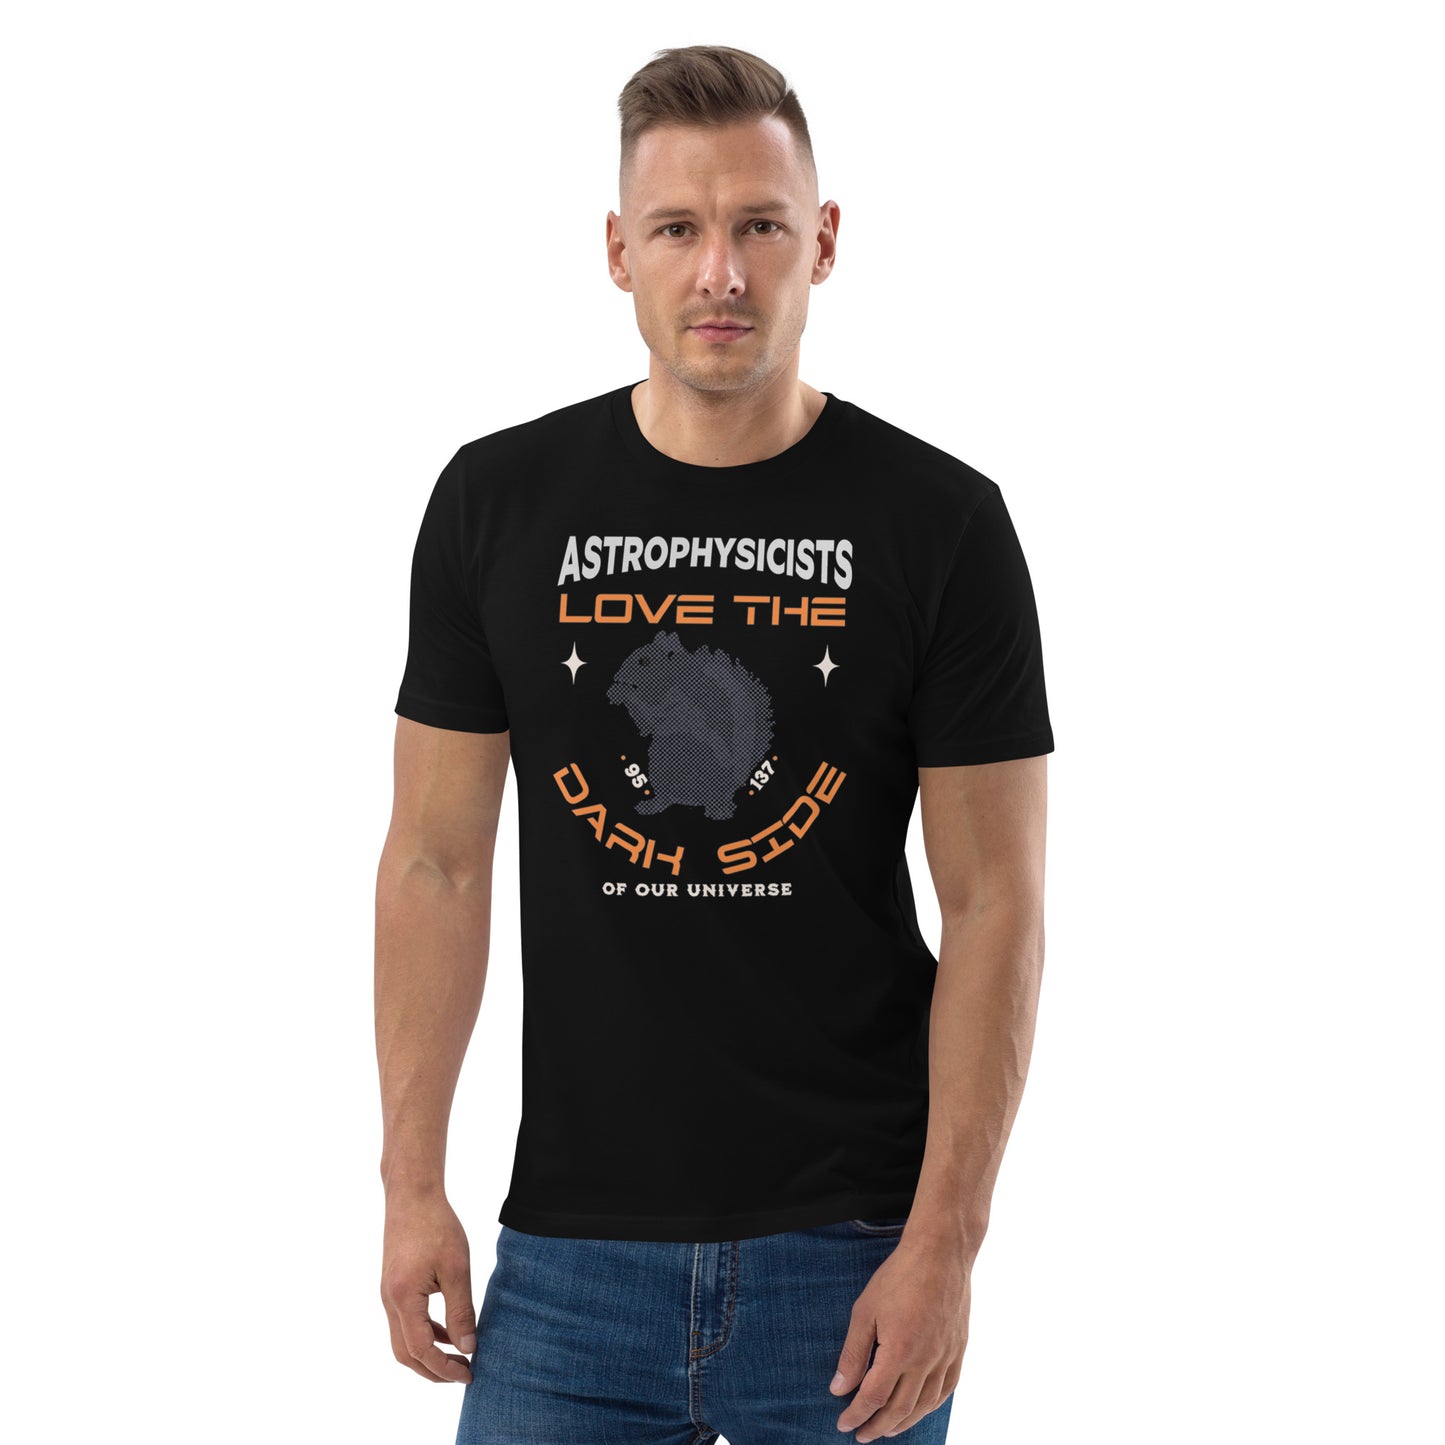 Unisex organic cotton t-shirt - Astronomers Love The Dark Side of Our Universe